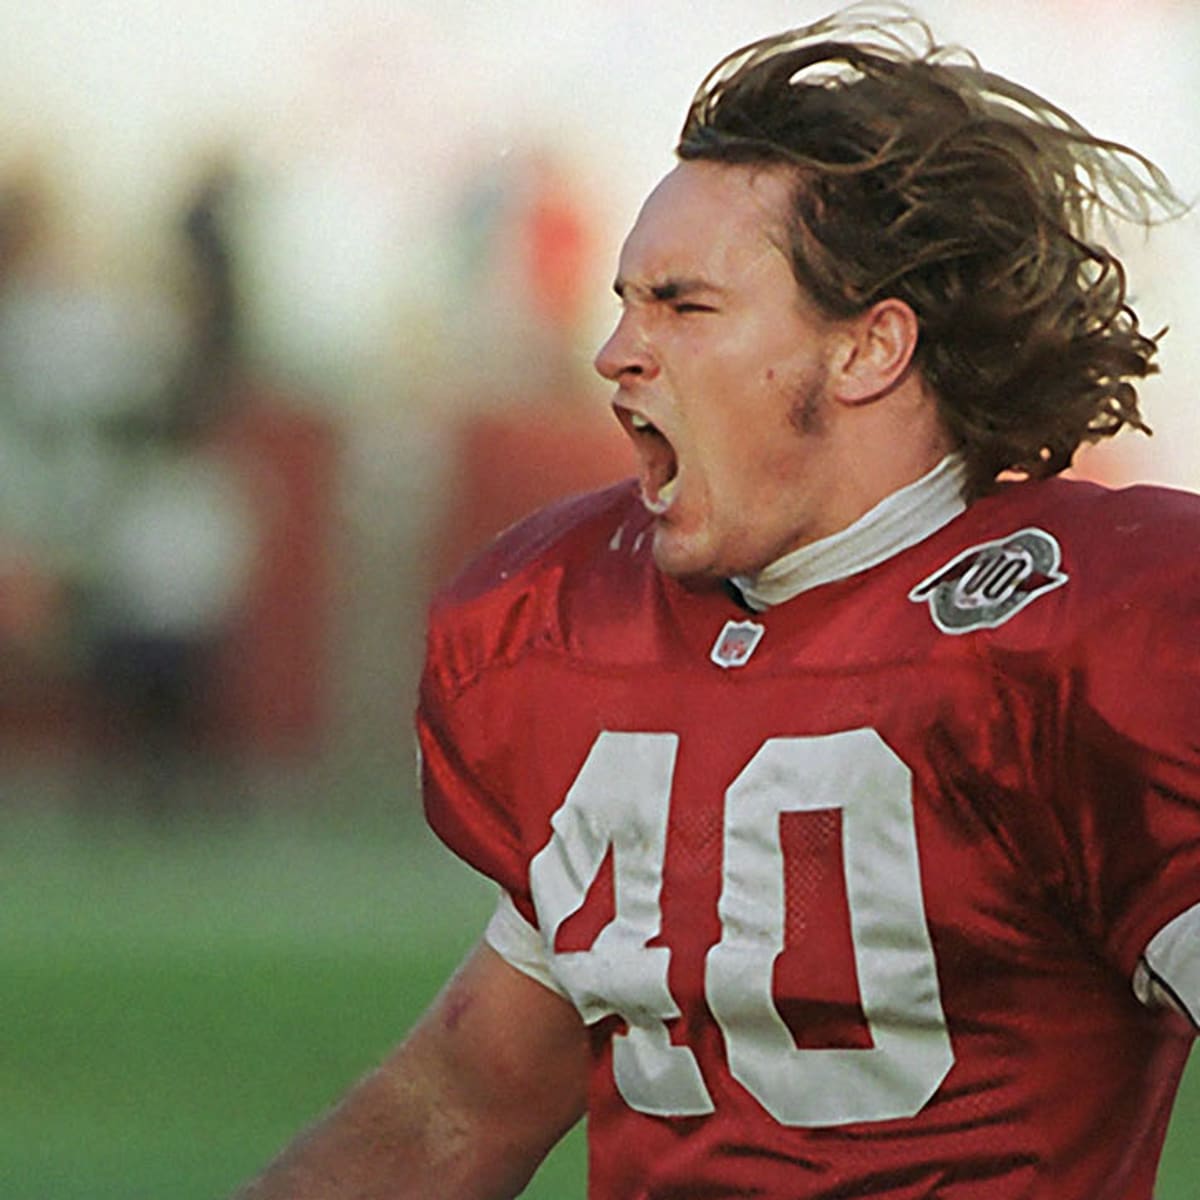 This is Pat Tillman. In May, 2002 he left the NFL and enlisted in